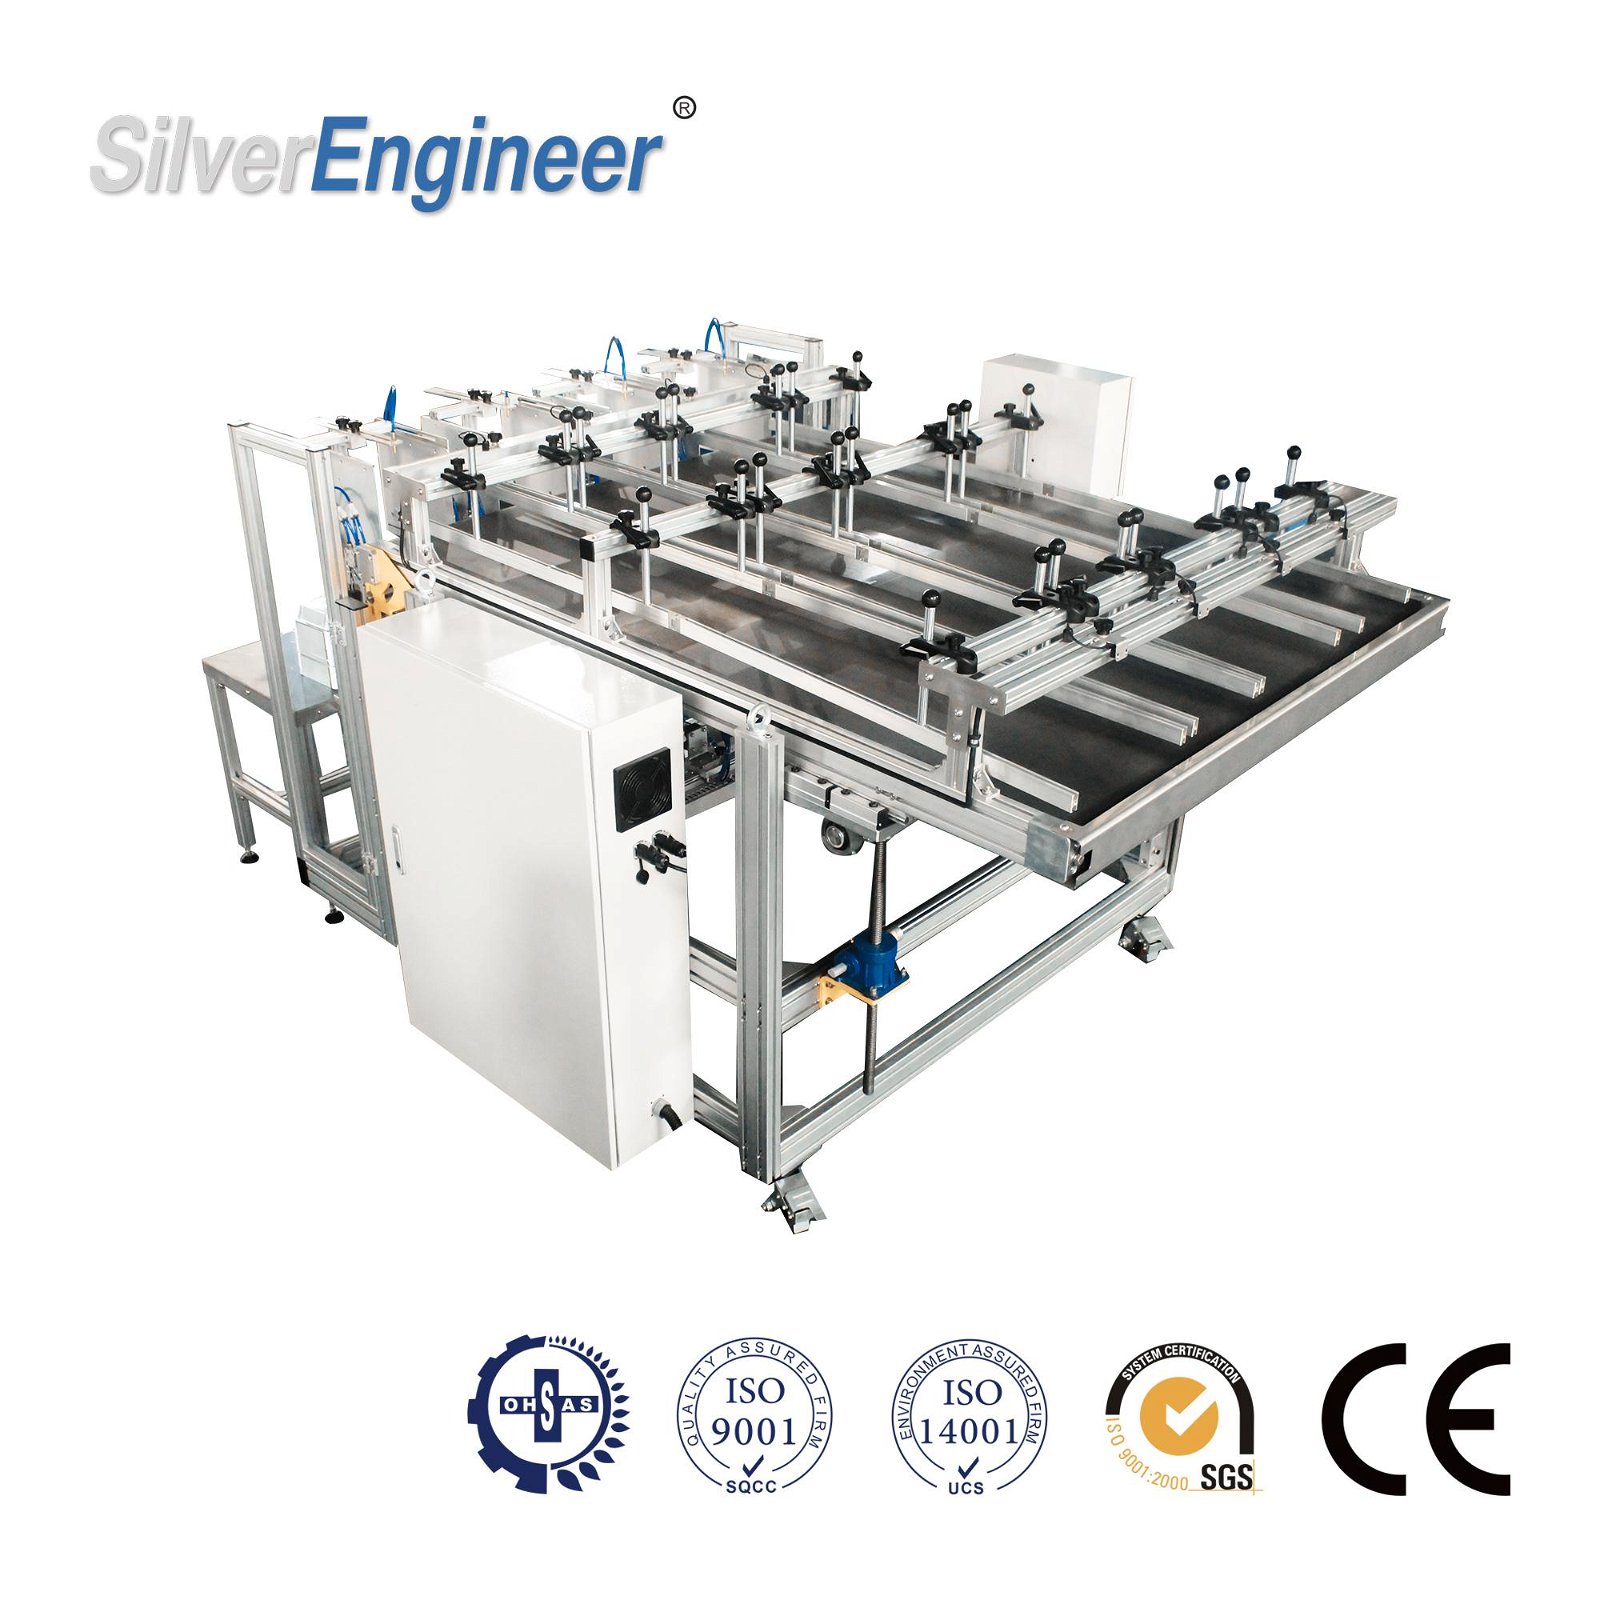 China Best Smart Aluminum Foil Container Making Machine From Silverengineer 3